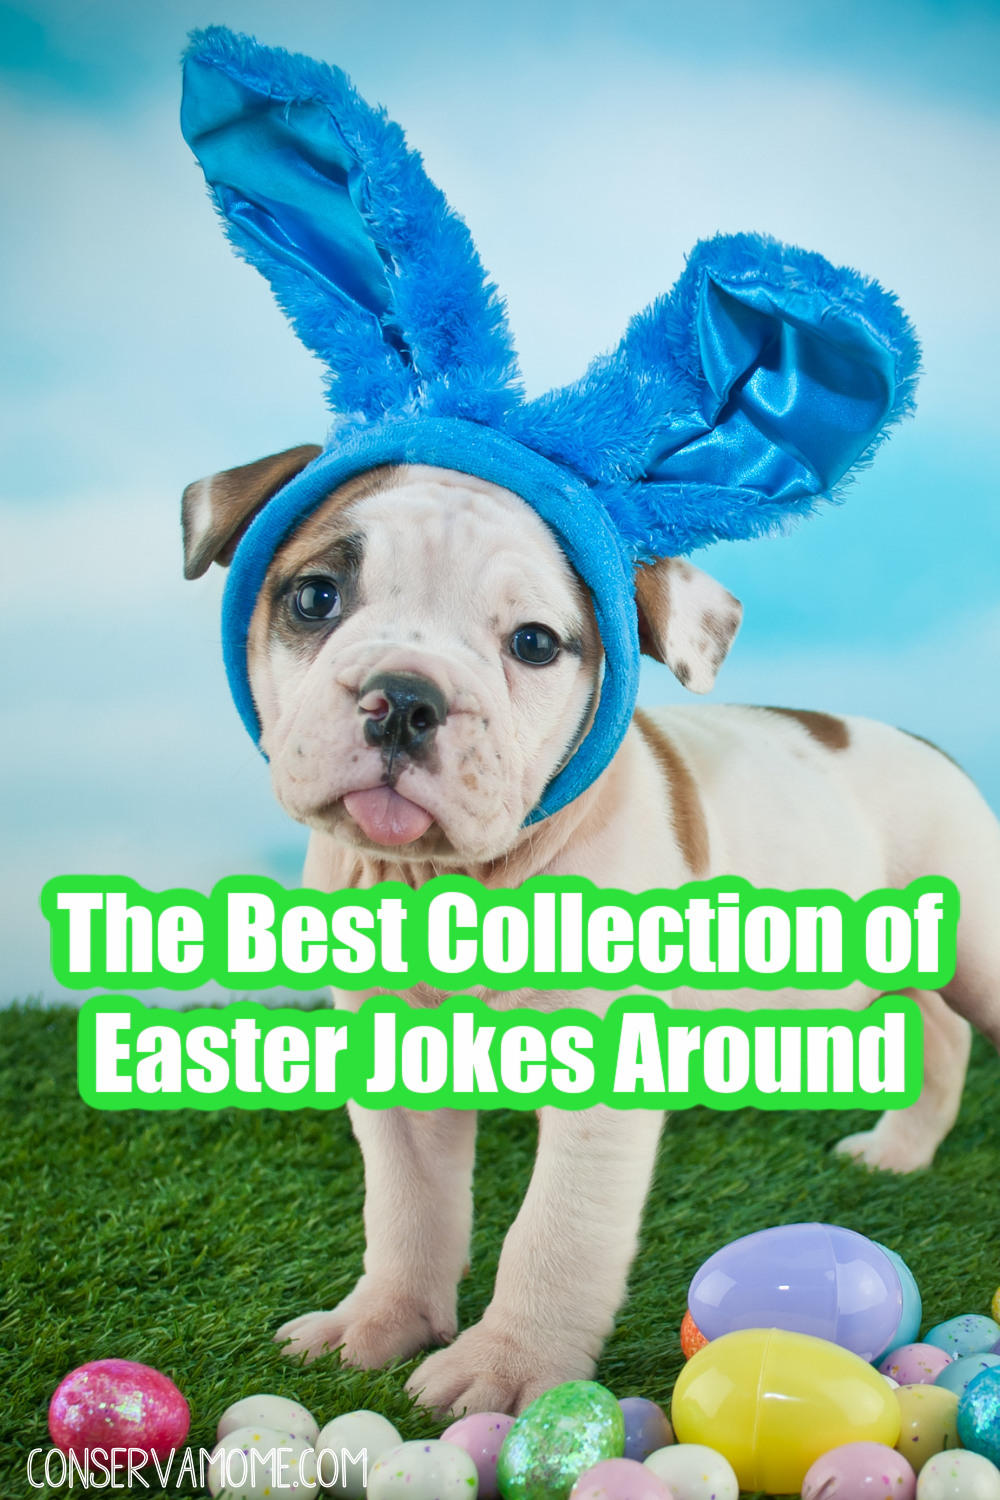 The Best collection of Easter Jokes around